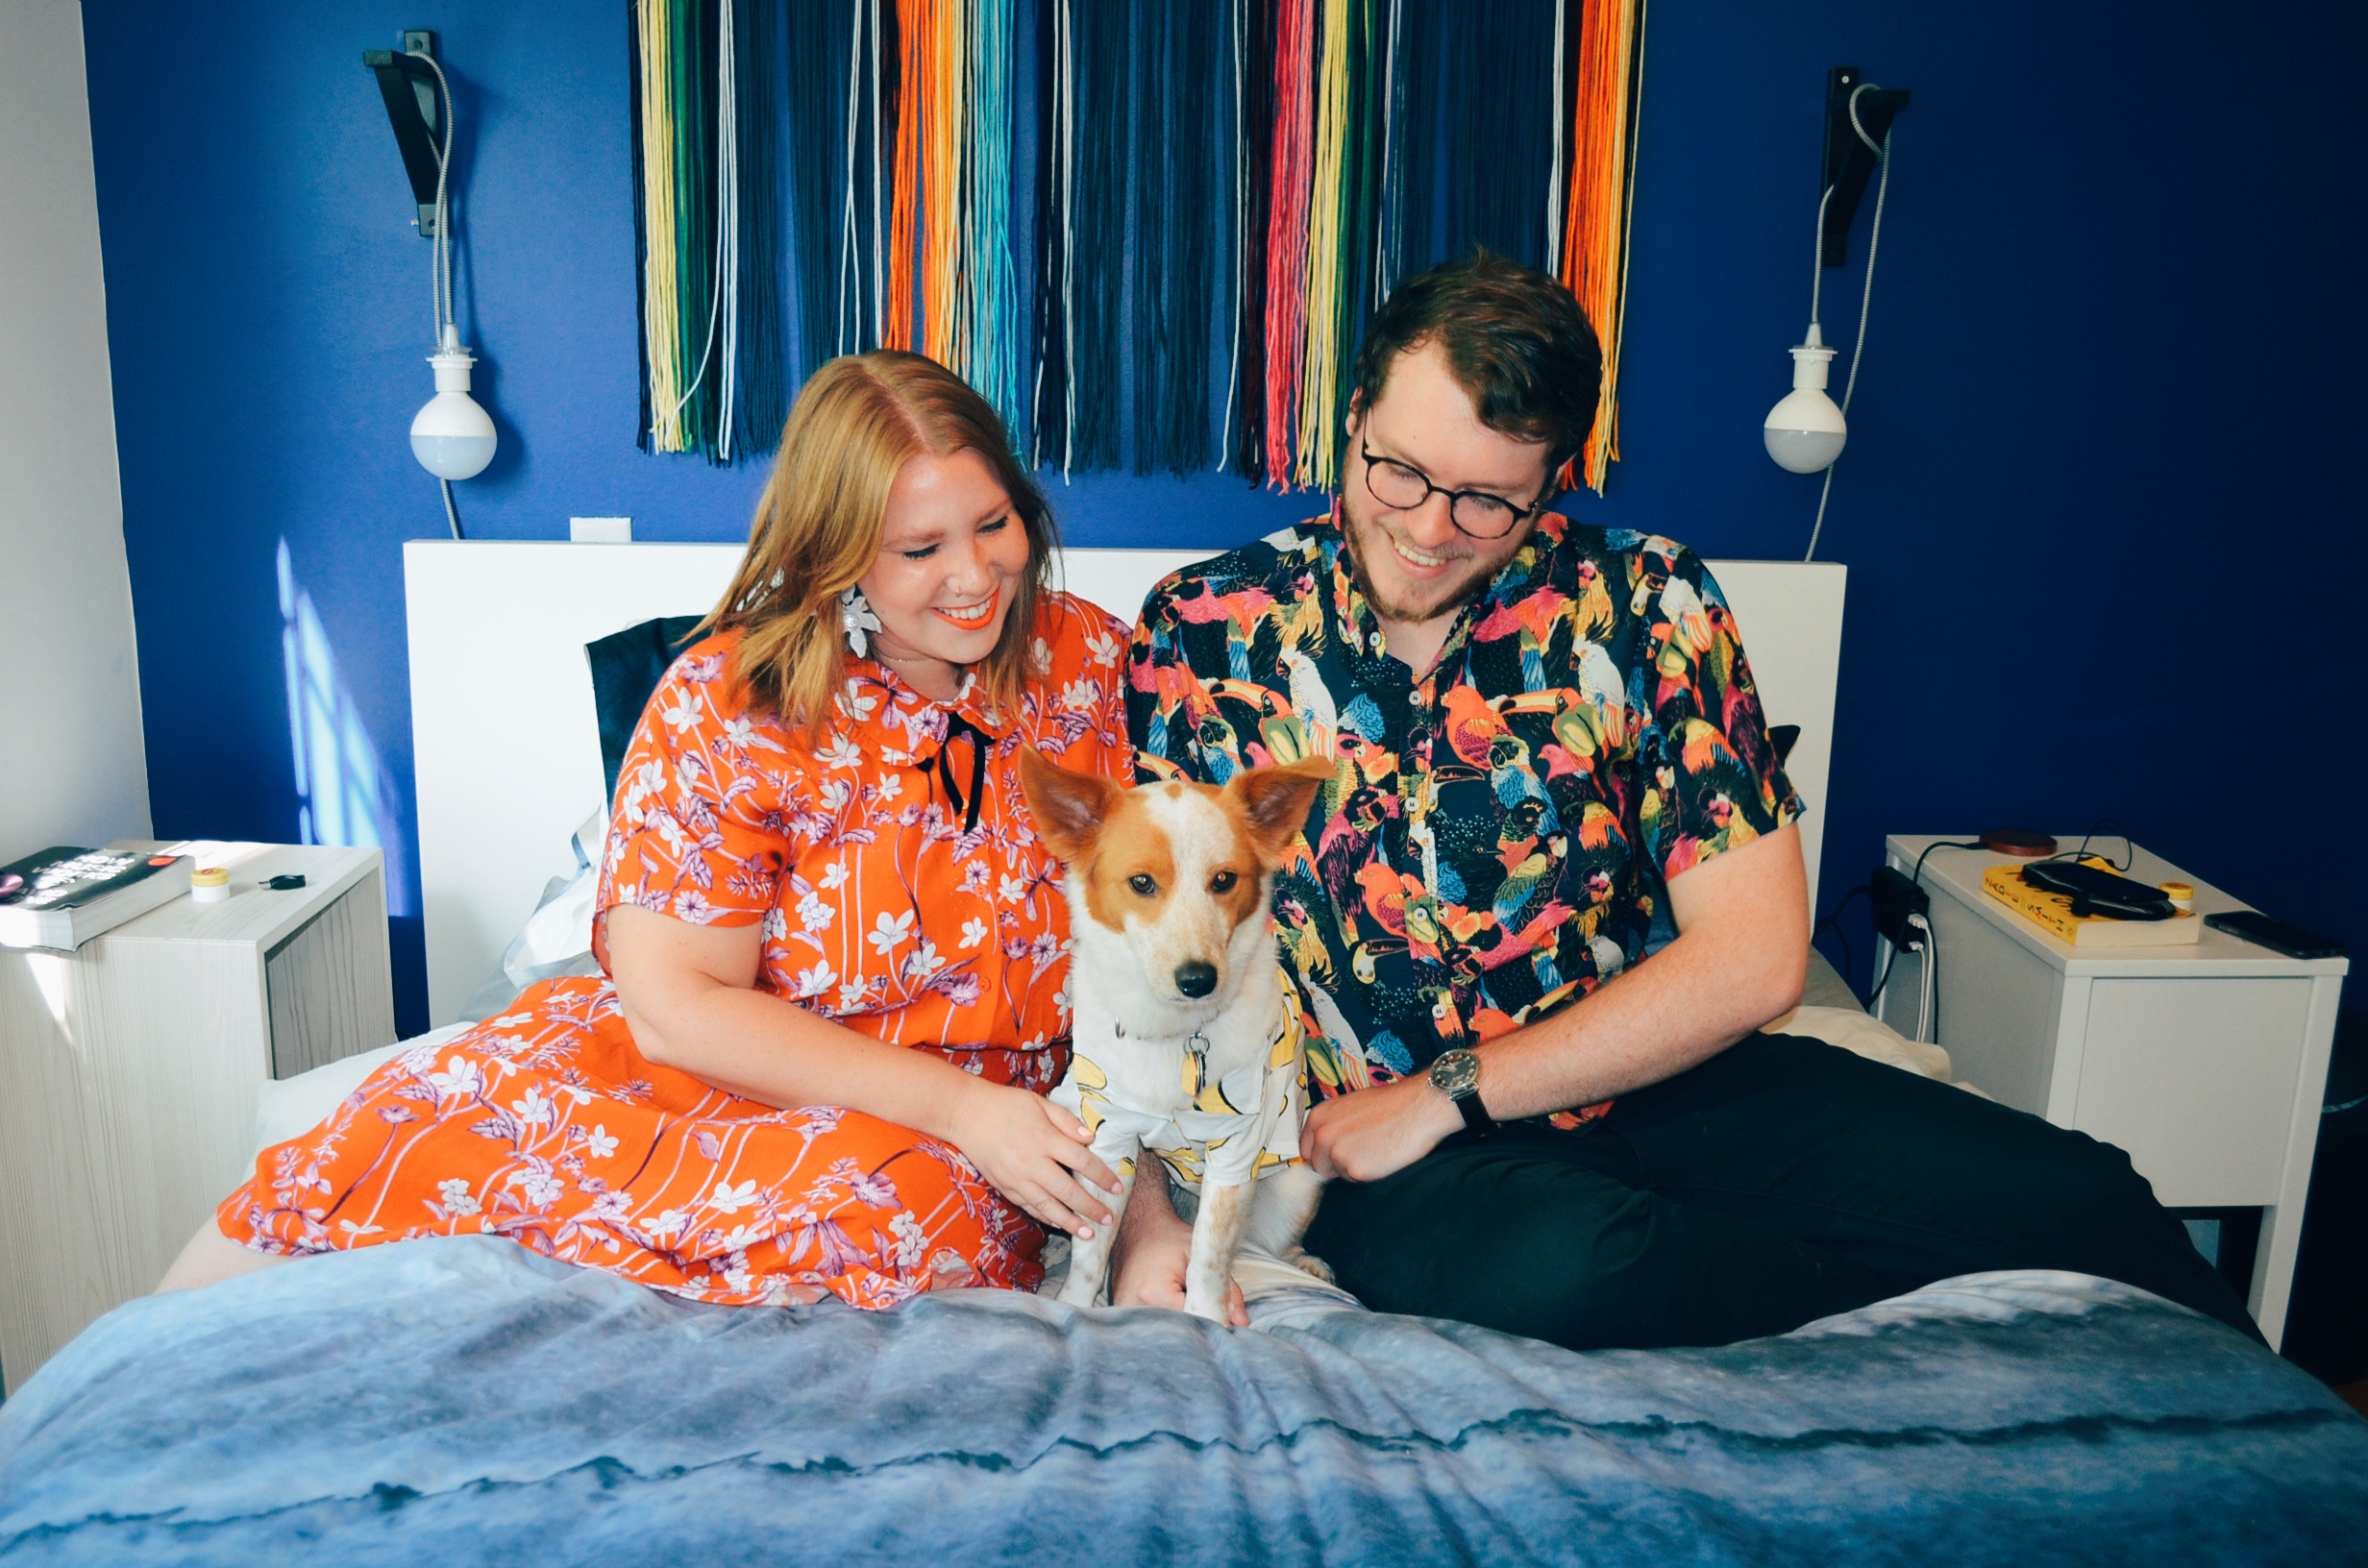 Chelsea Leibow, Mike Farrell, and their dog, Stanley, for Argos & Artemis.